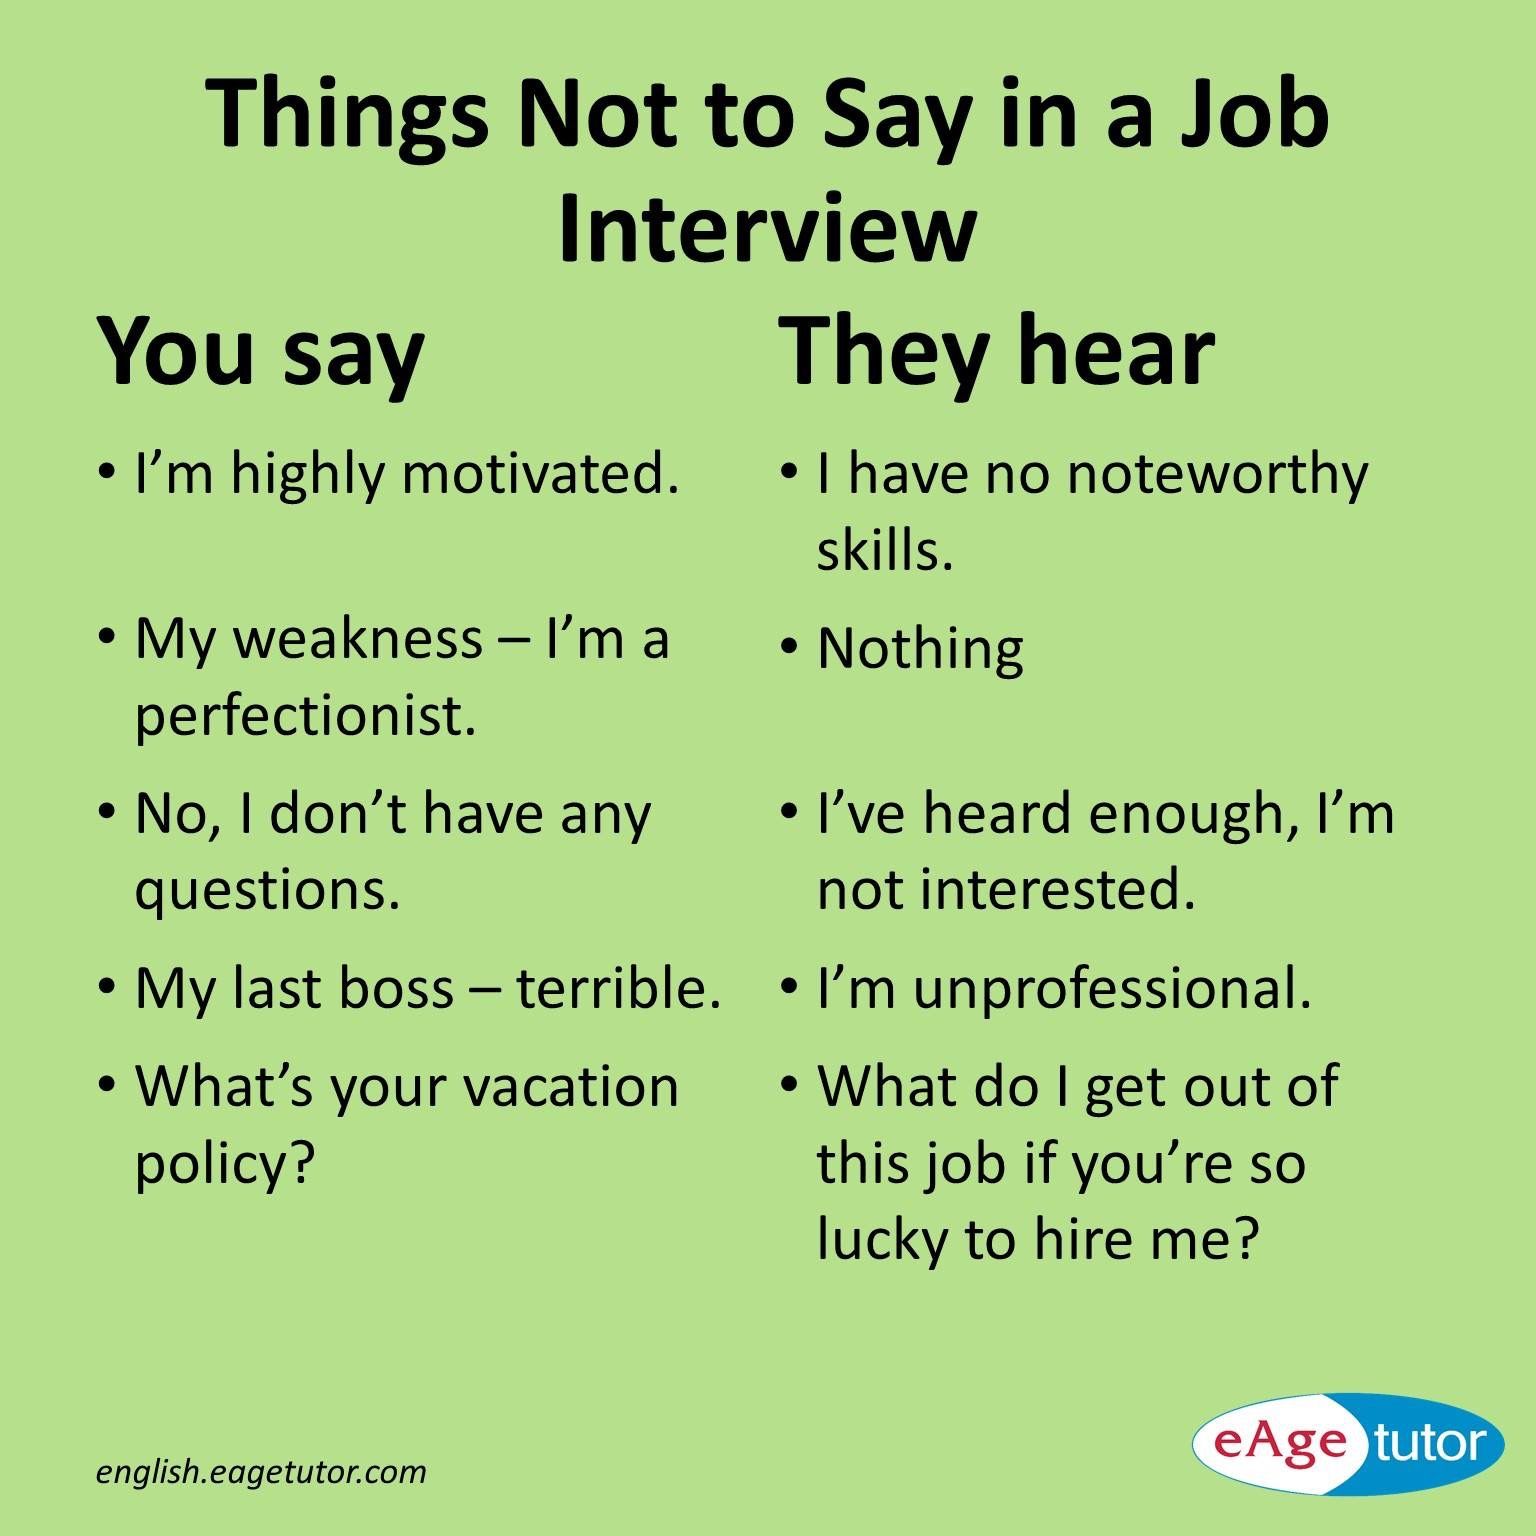 Things Not to Say in a Job Interview